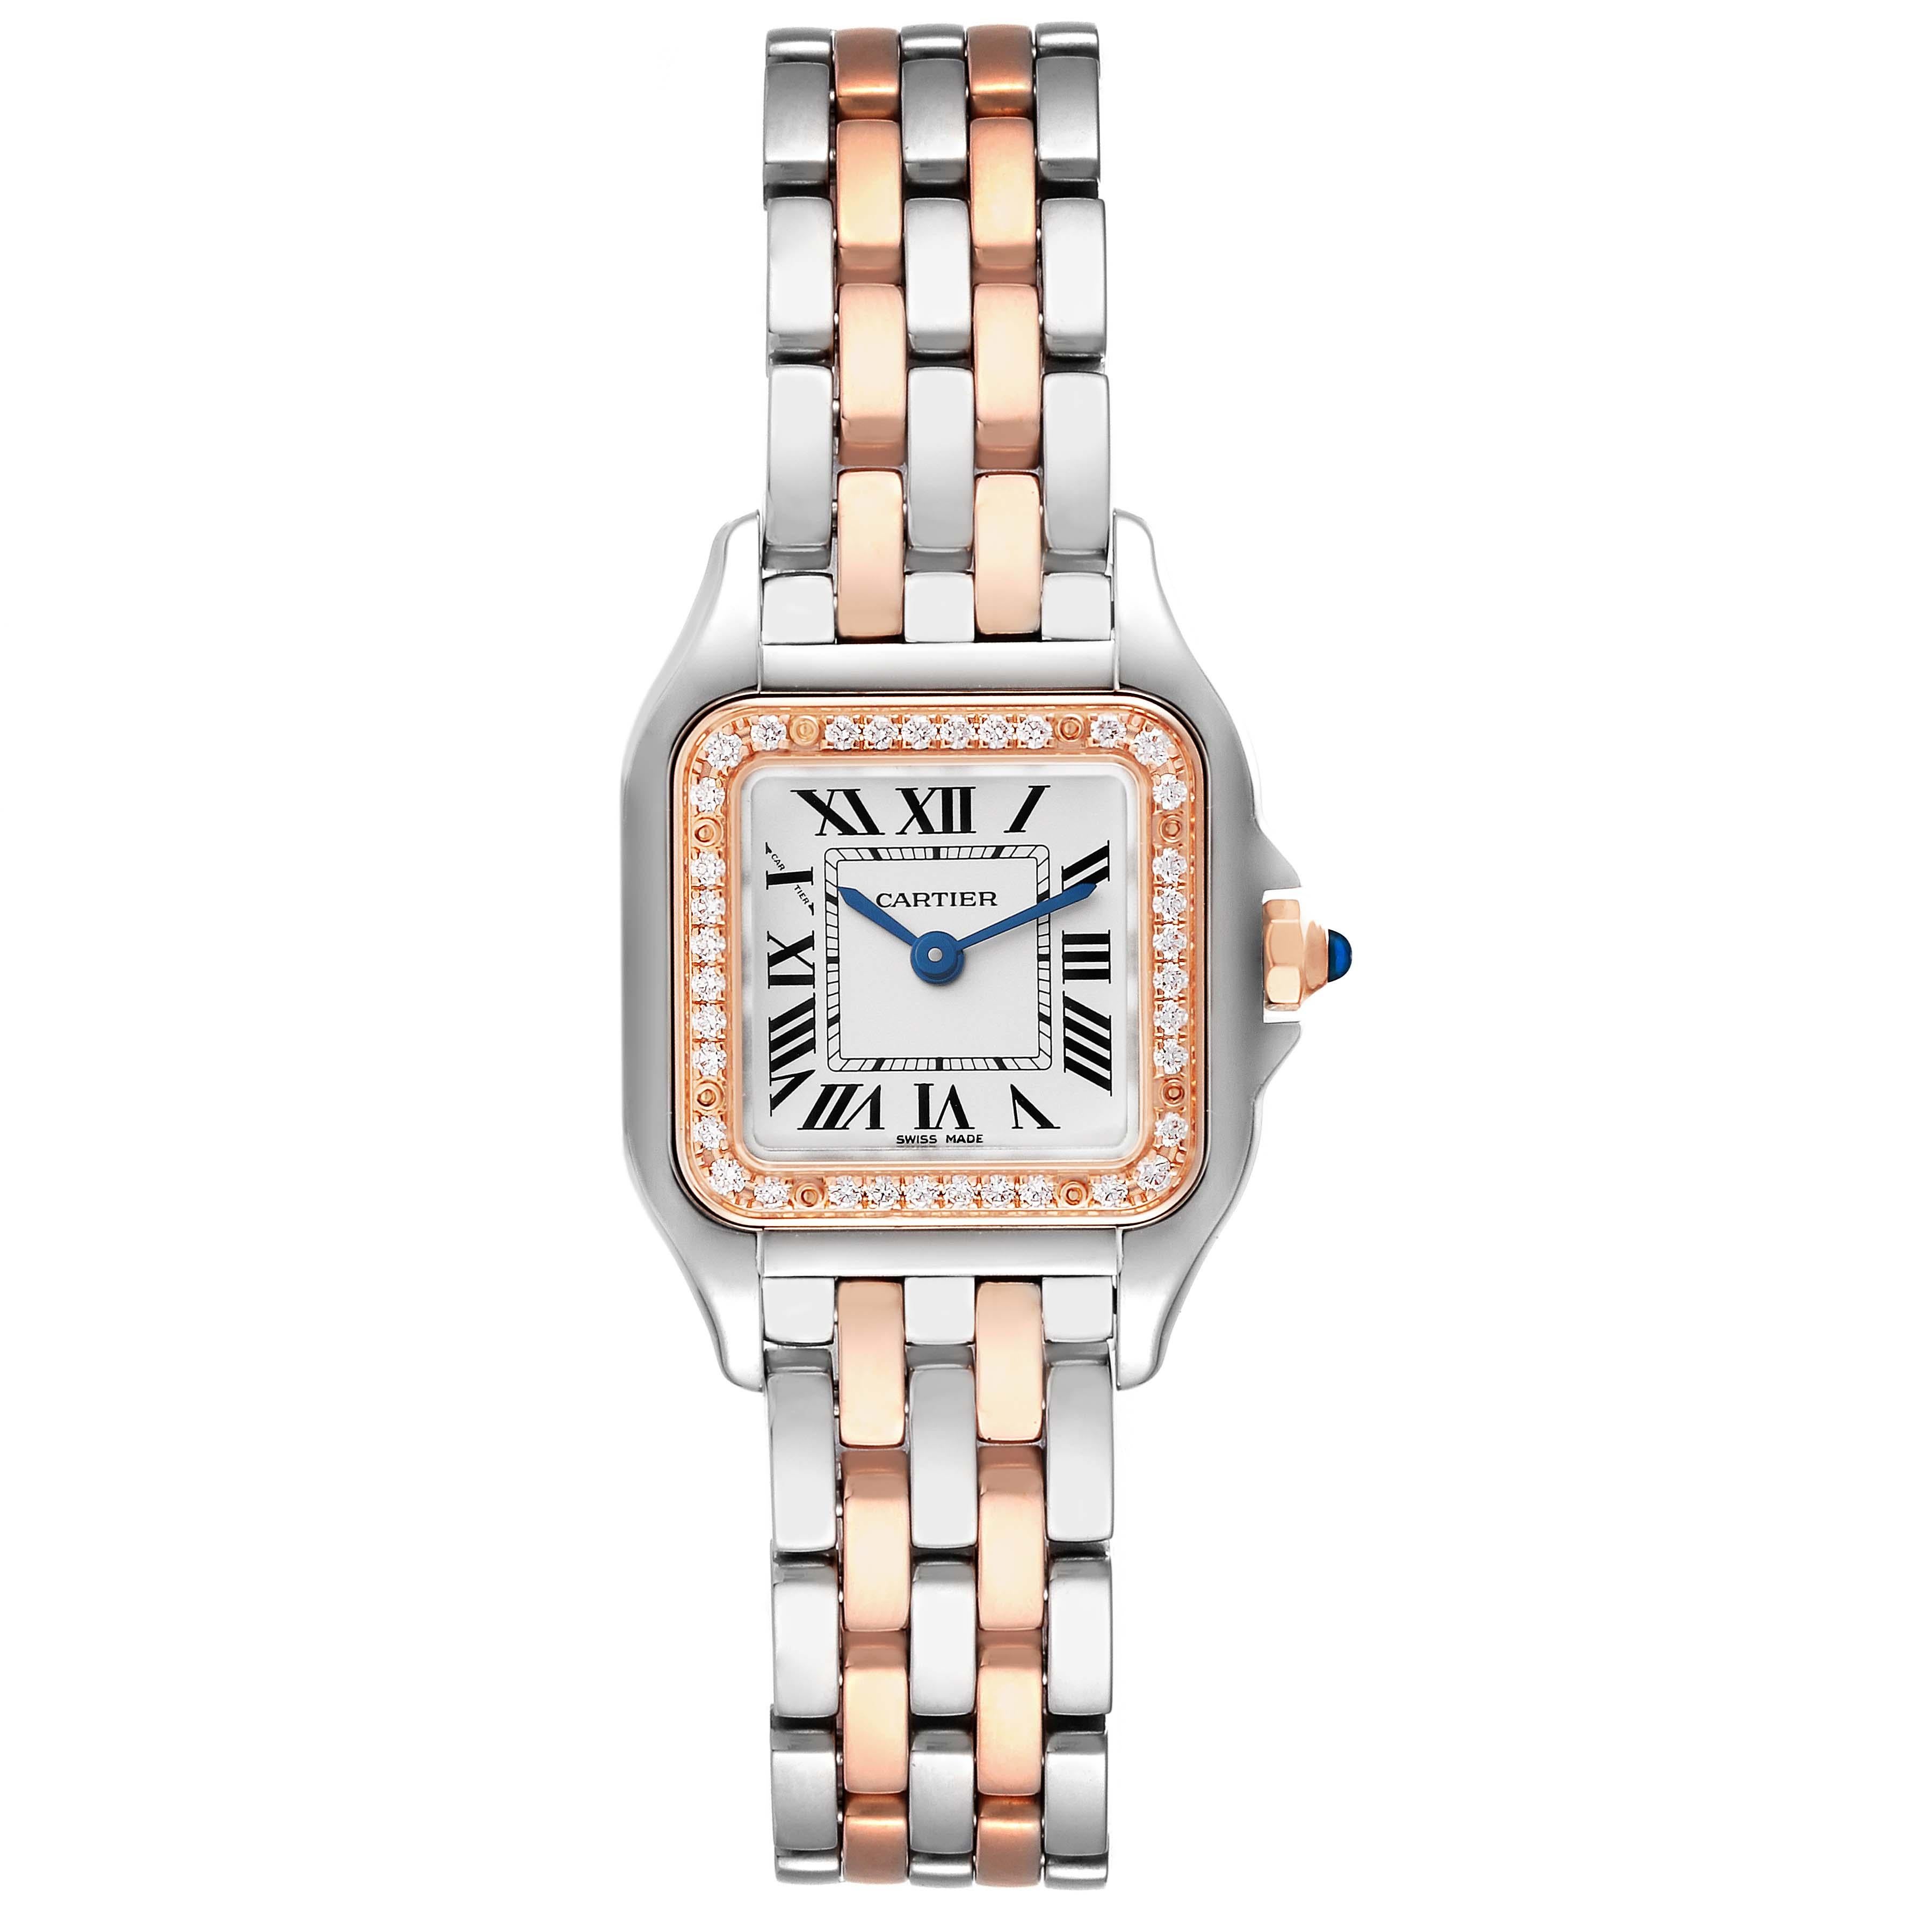 Cartier Panthere Small Steel Rose Gold Diamond Ladies Watch W3PN0006 Box Card. Quartz movement. Stainless steel and 18k rose gold case 22.0 x 30.0 mm. Octagonal crown set with a blue spinel cabochon. 18k rose gold bezel set with original Cartier